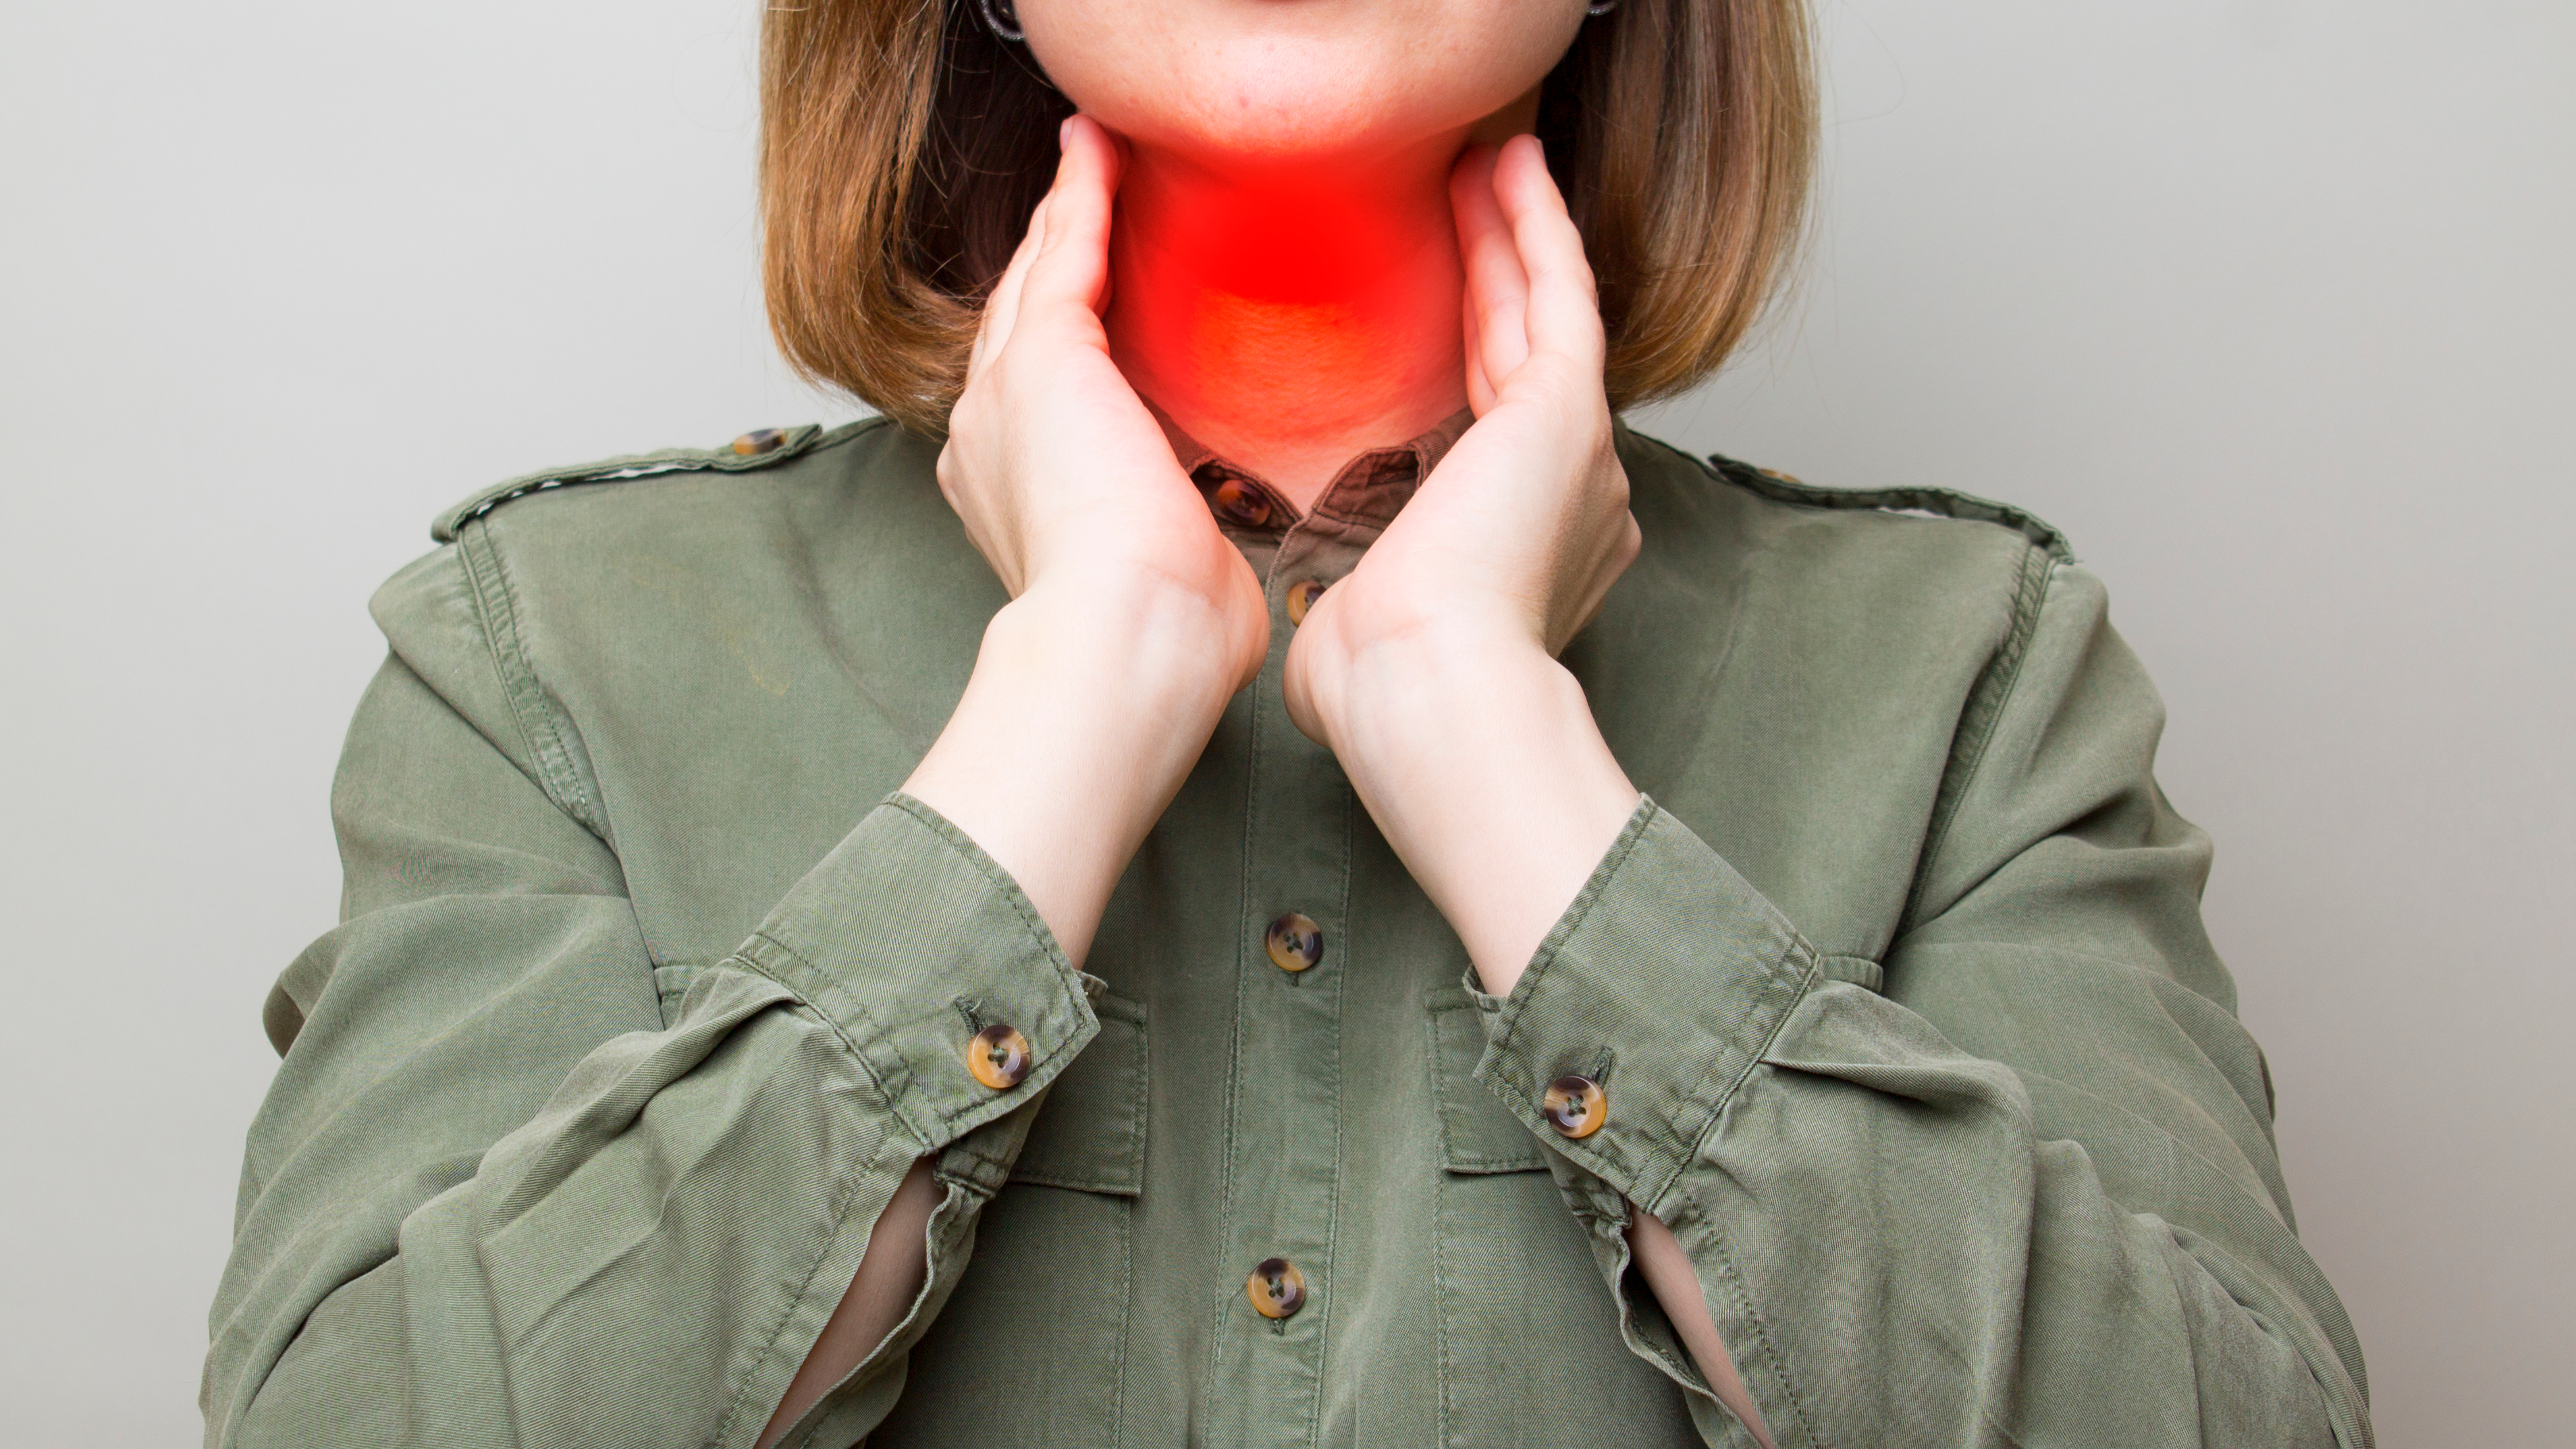 Many risk factors can be responsible for a diseased thyroid.